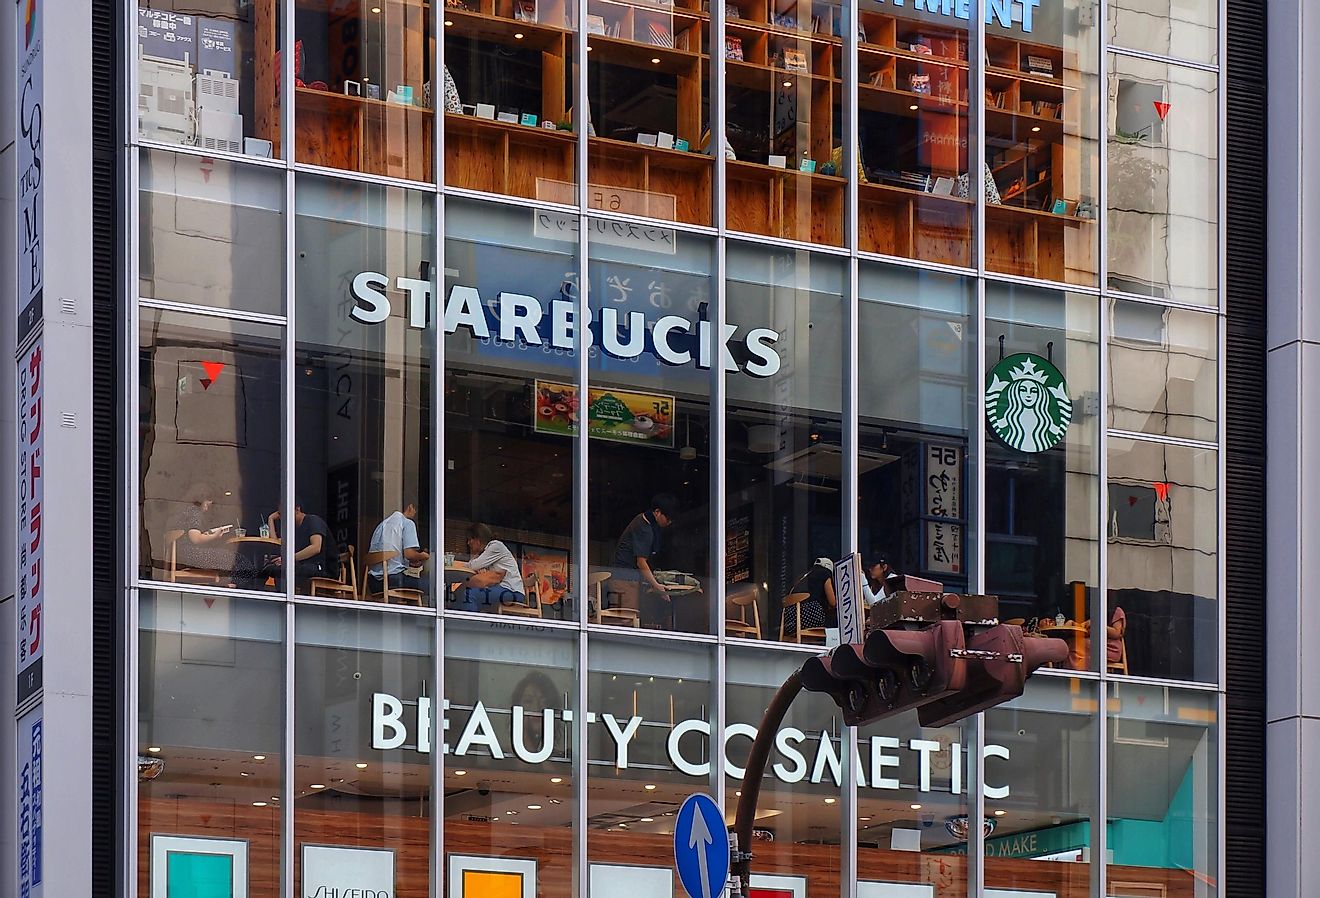 One the largest Starbucks in the world is located in Tokyo, Japan. Photo by Andy Xu on Unsplash